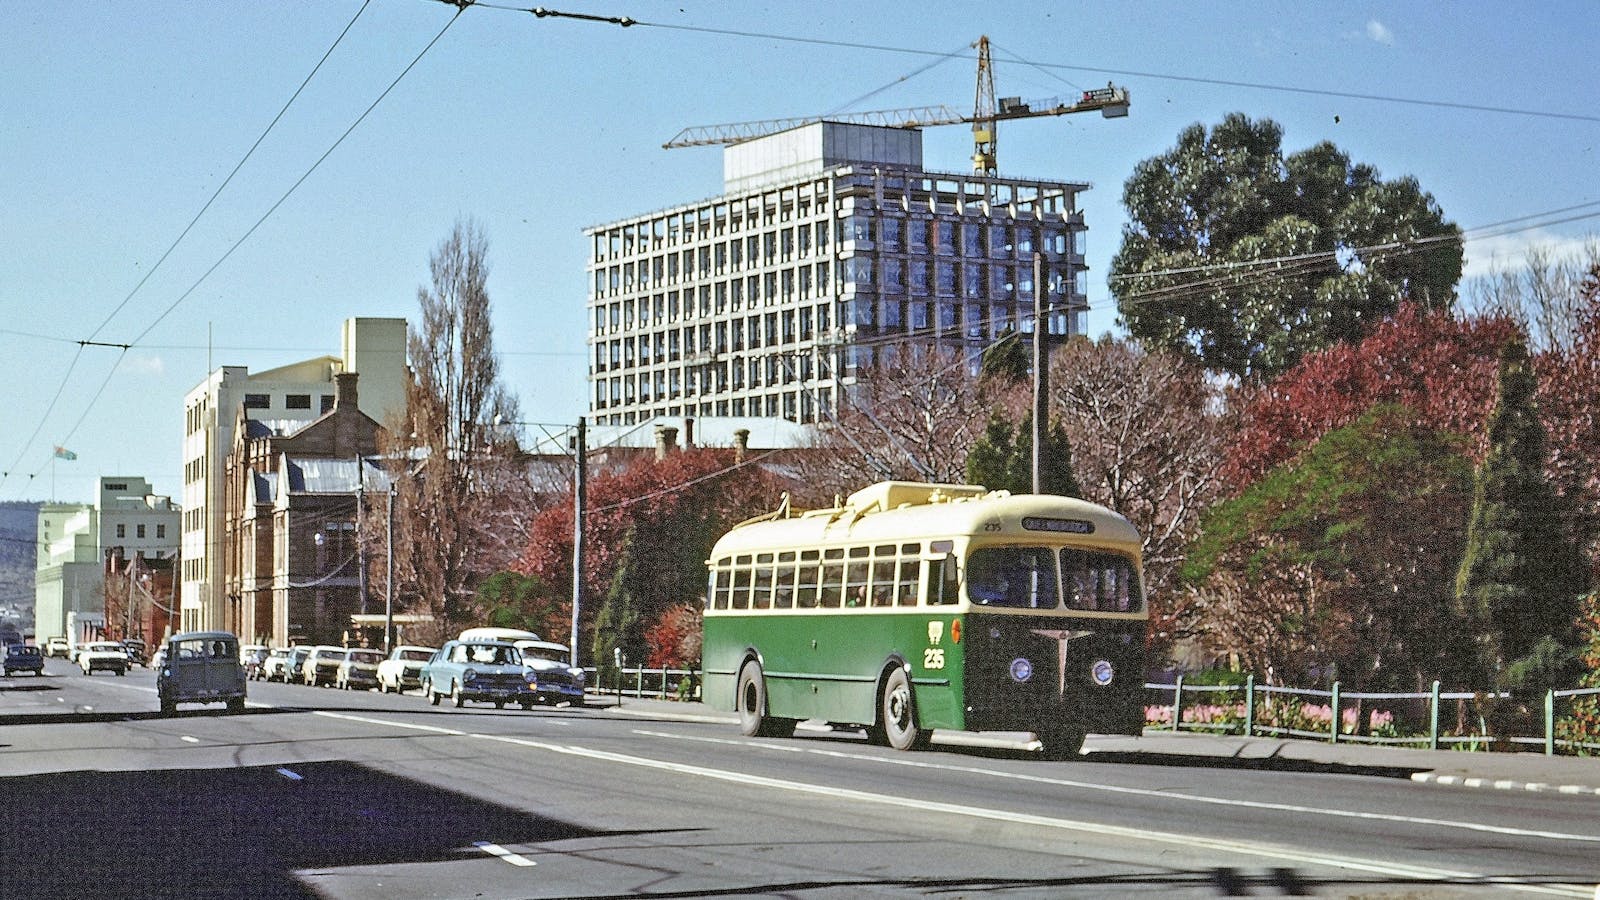 Trolley Bus 235 is one of the two electric buses at the Museum, seen here in 1968 in Davey St.